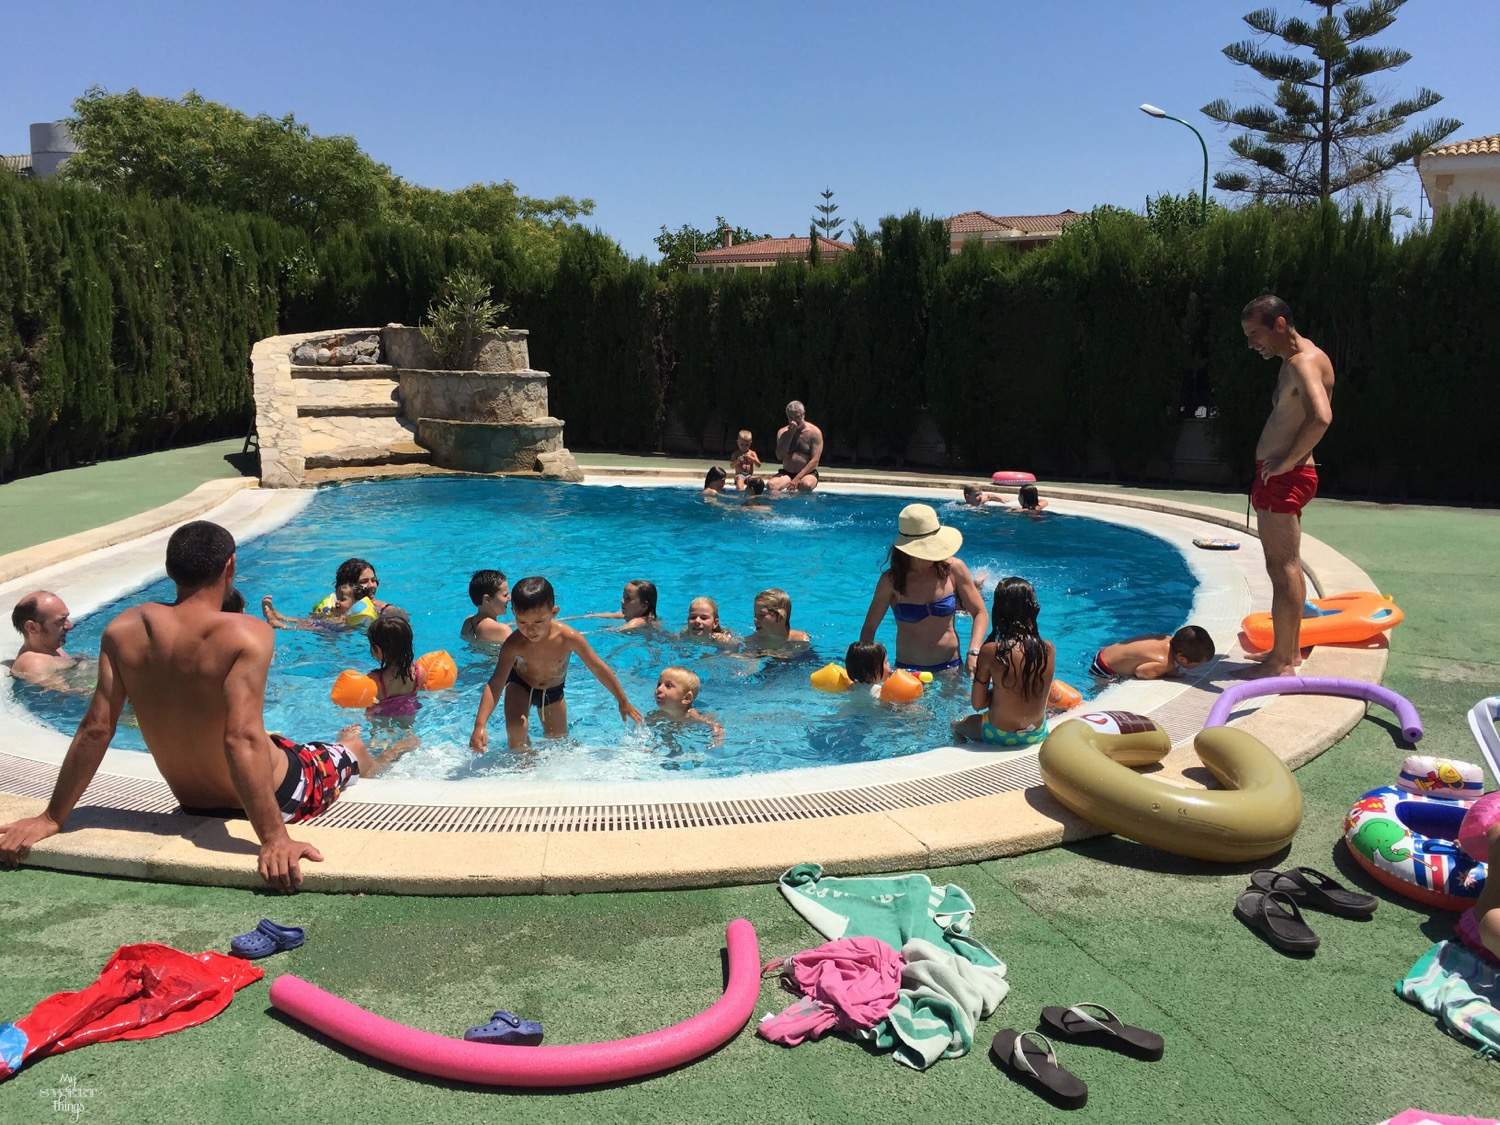 What to do in summer in Mallorca - Having fun at the pool